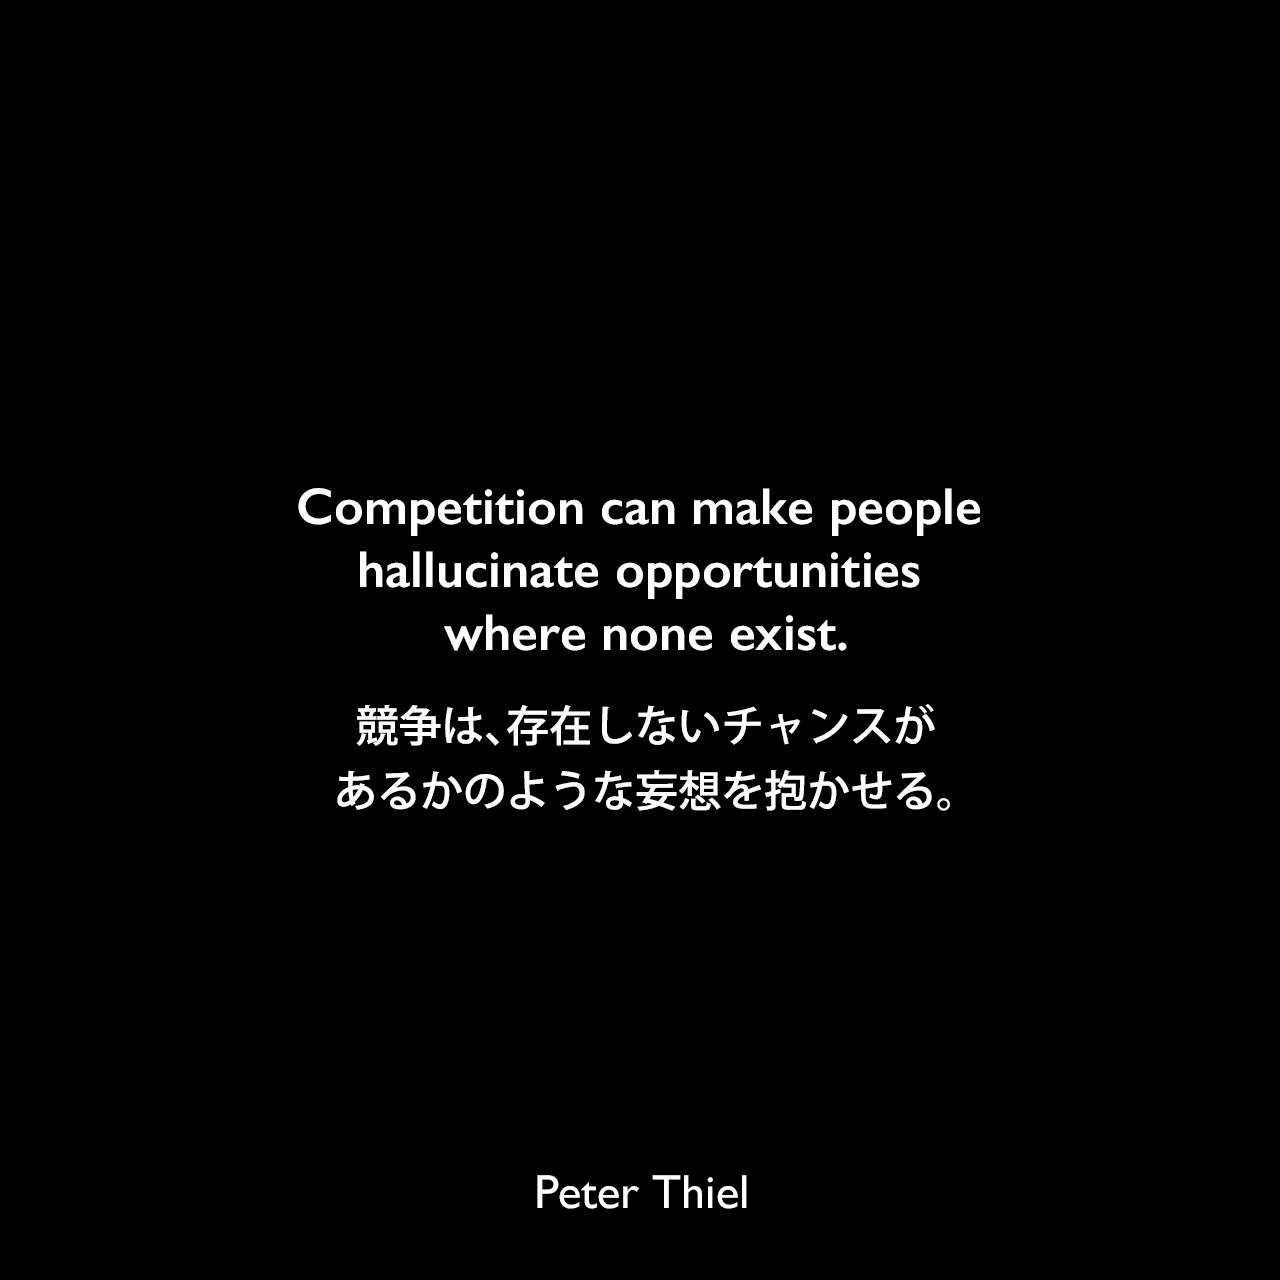 Competition can make people hallucinate opportunities where none exist.競争は、存在しないチャンスがあるかのような妄想を抱かせる。- ピーター・ティールの本「Zero to One」よりPeter Thiel